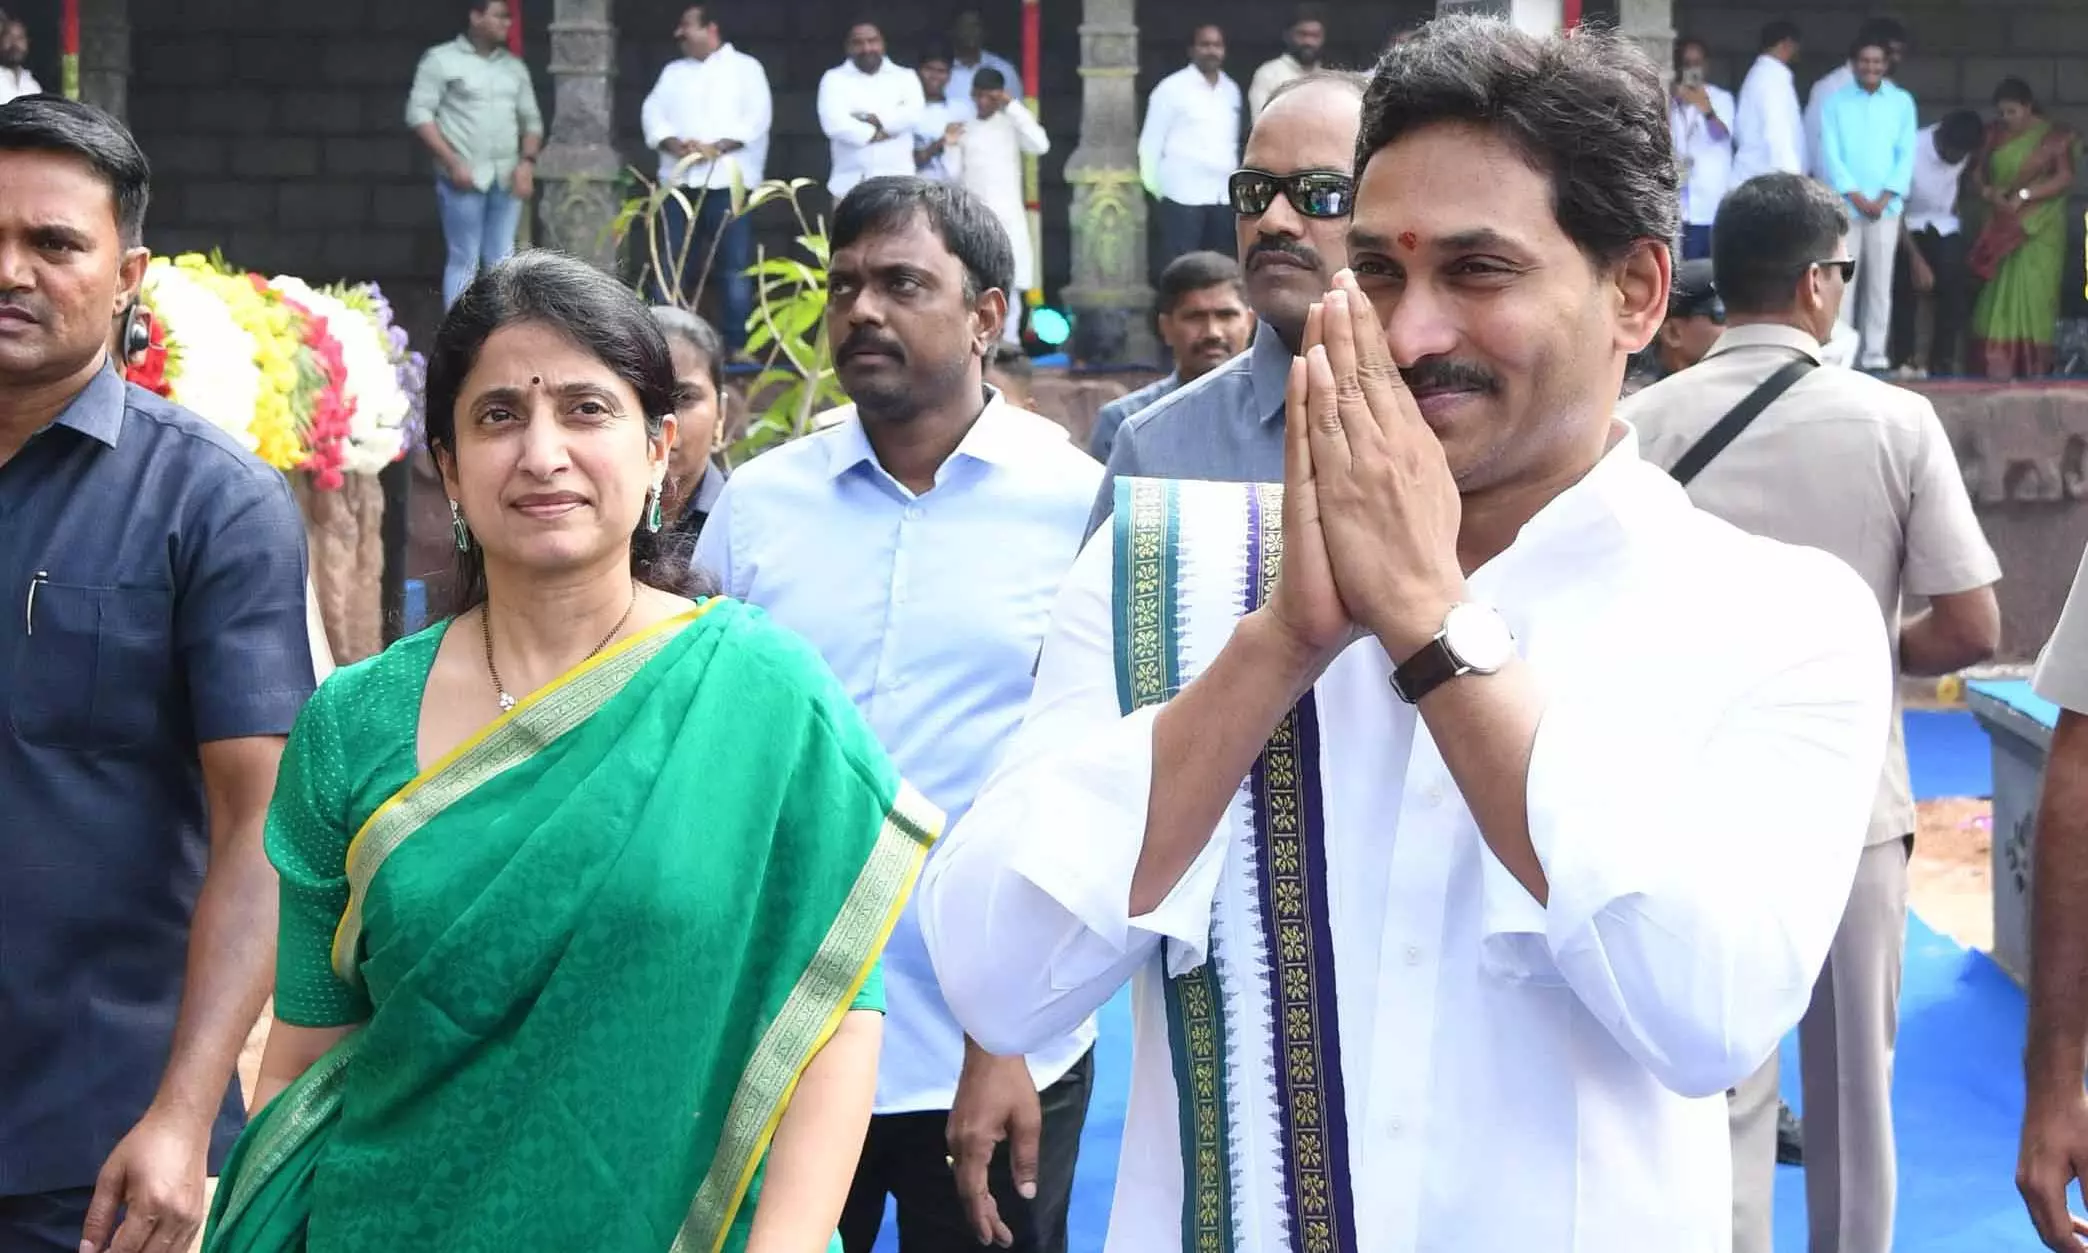 Jagan has ₹30,000 cash in hand for family